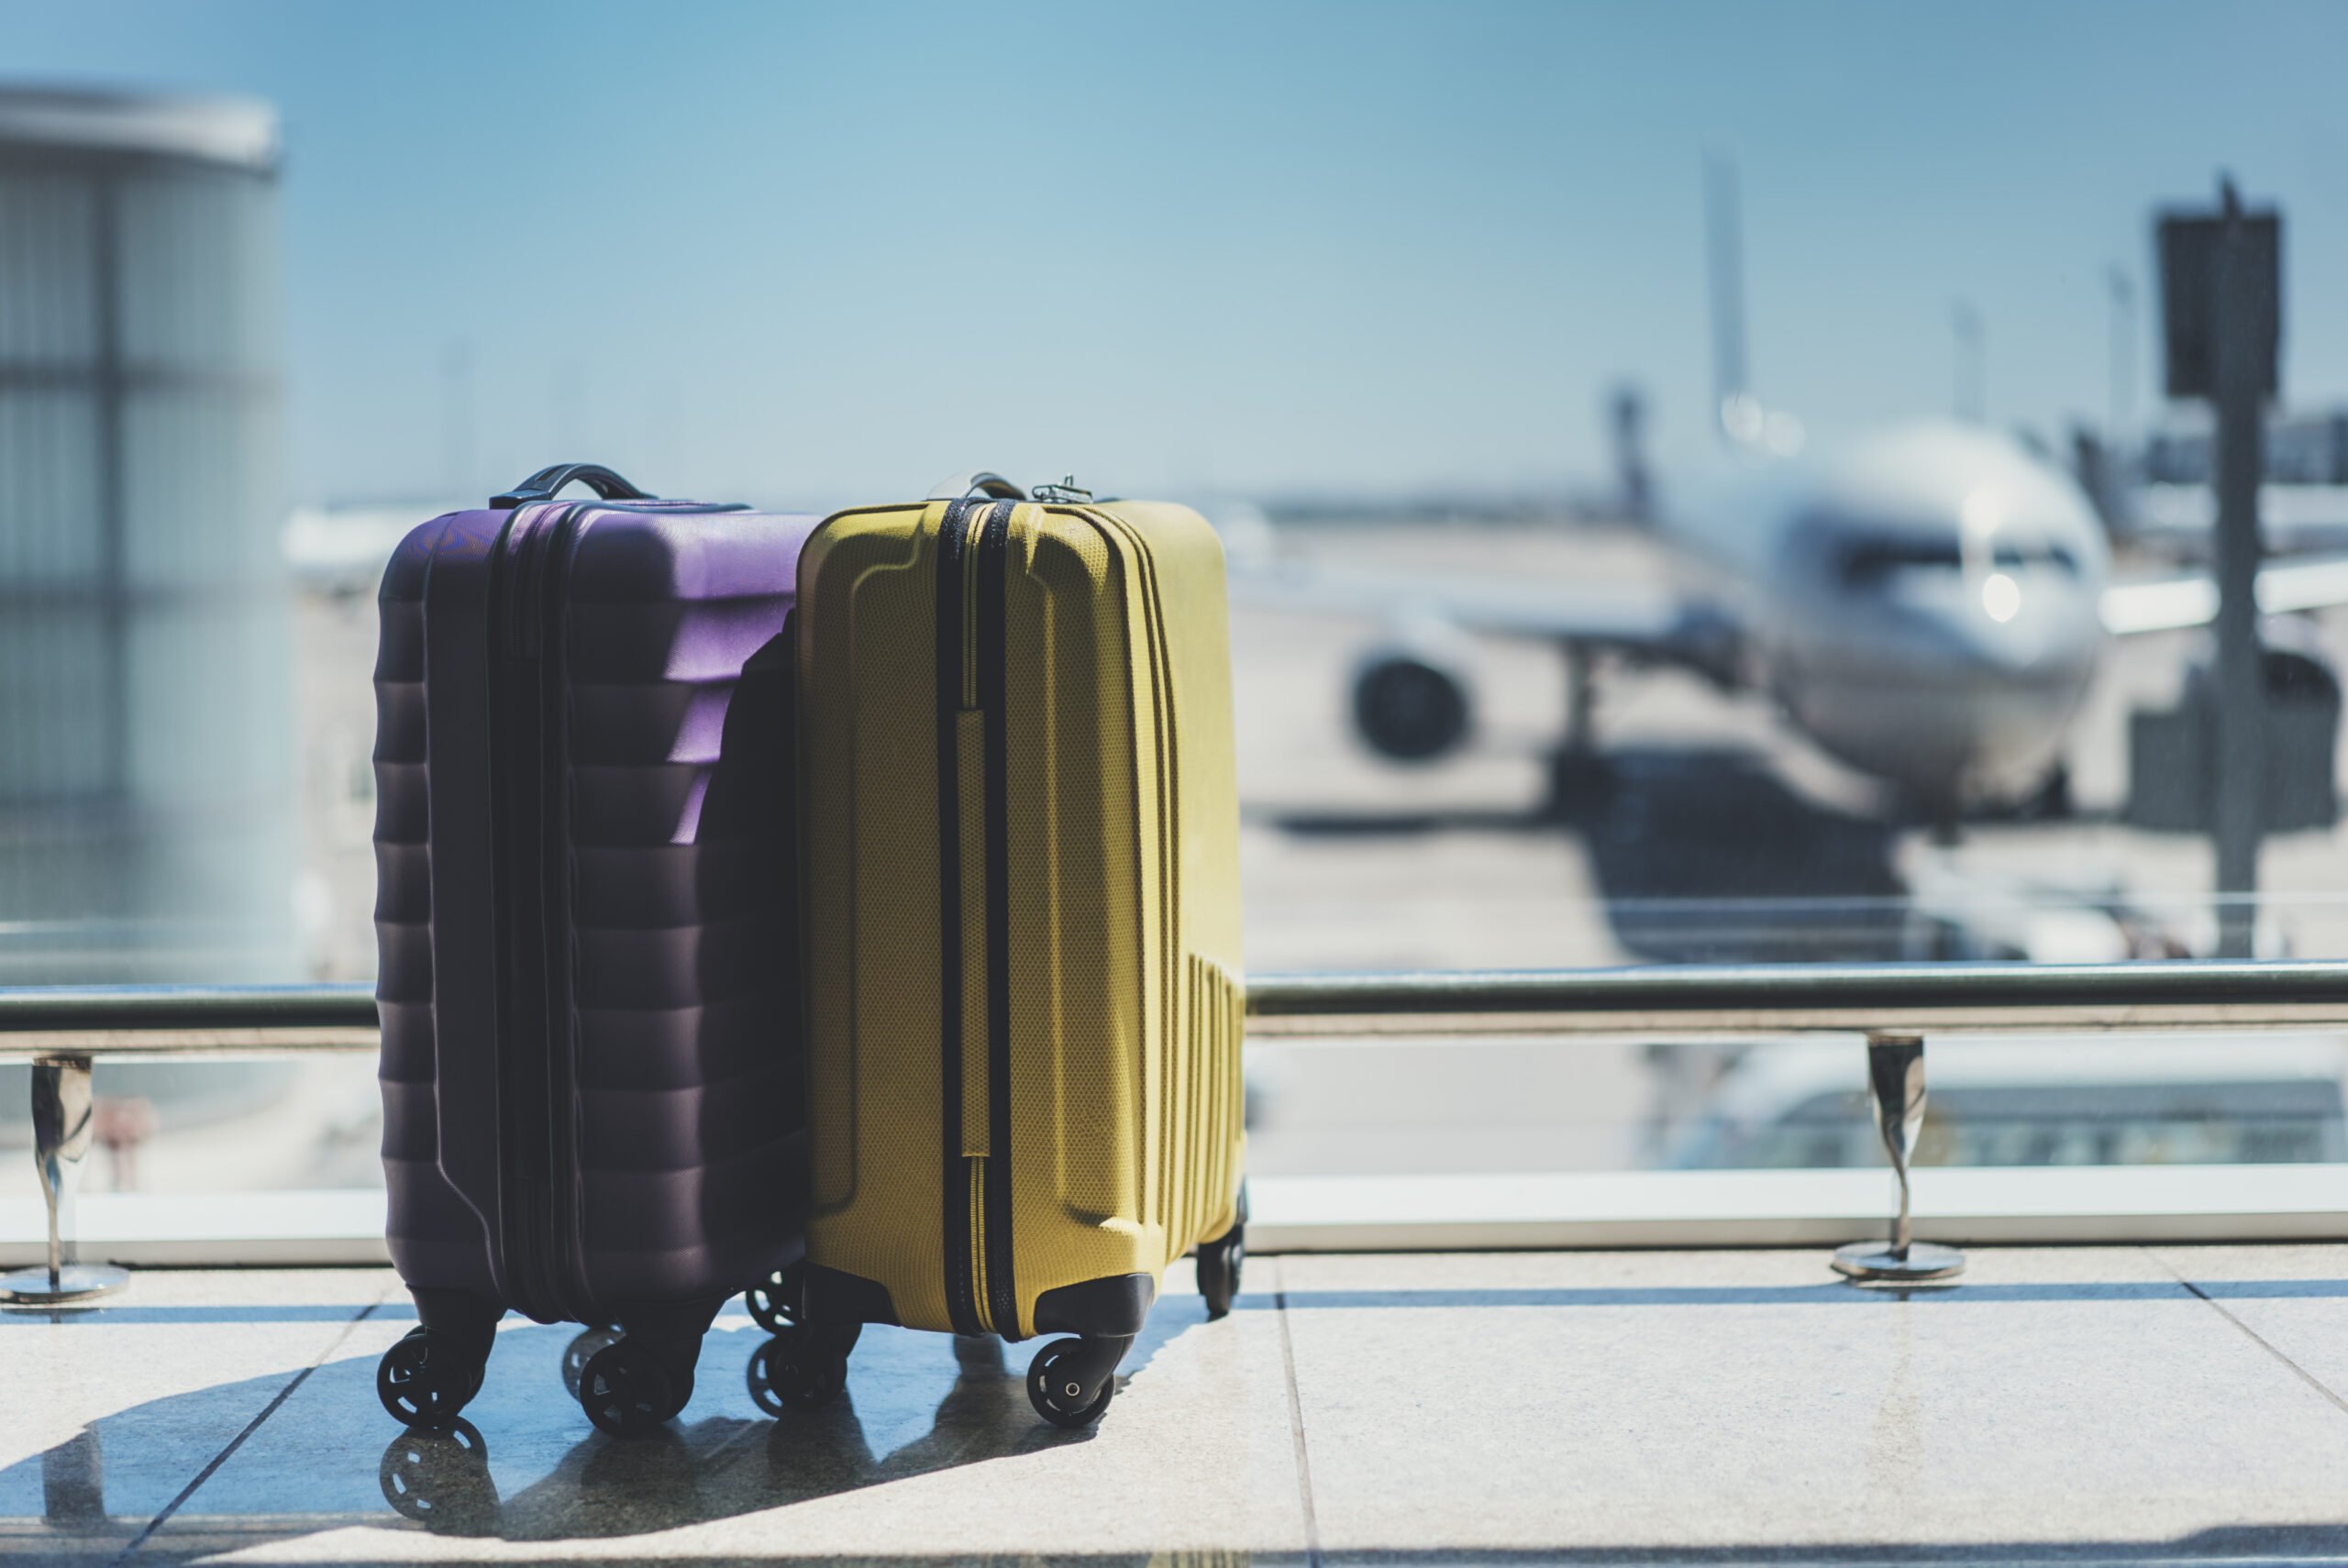 Best Luggage Deals: Save Hundreds on Luggage from Desley, Samsonite, Away  and More - CNET